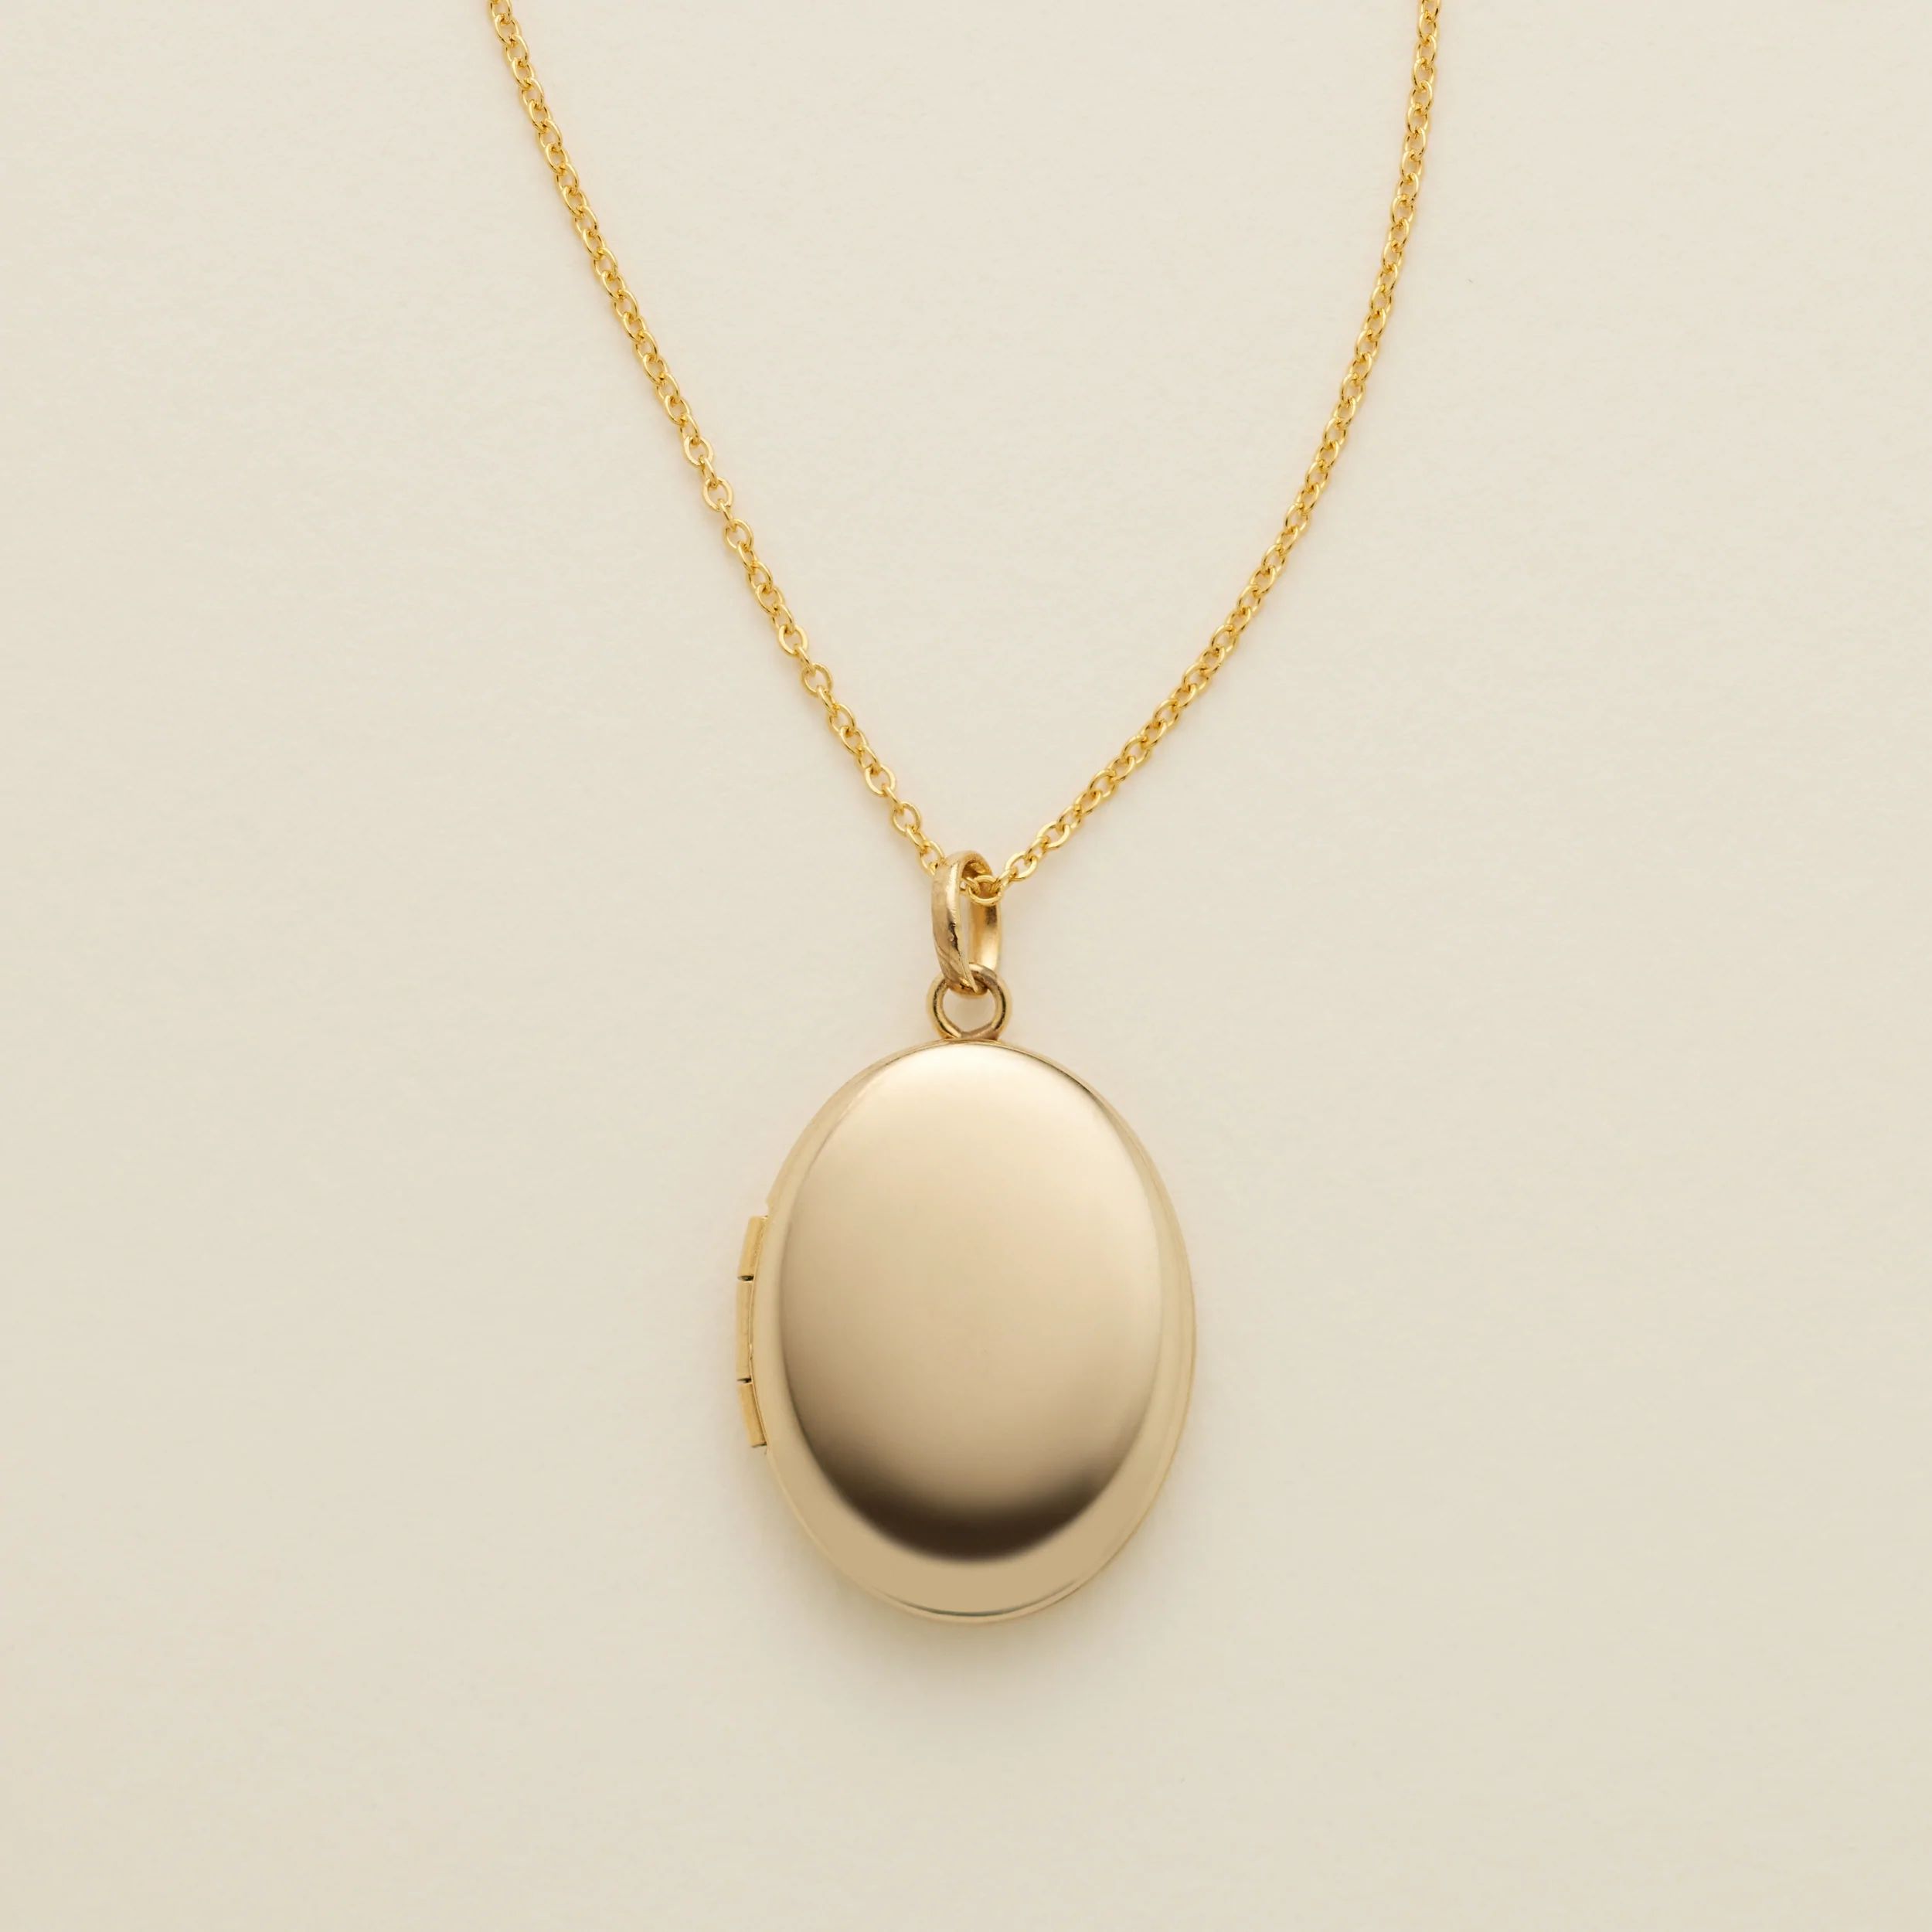 Oval Locket Necklace | Made by Mary (US)